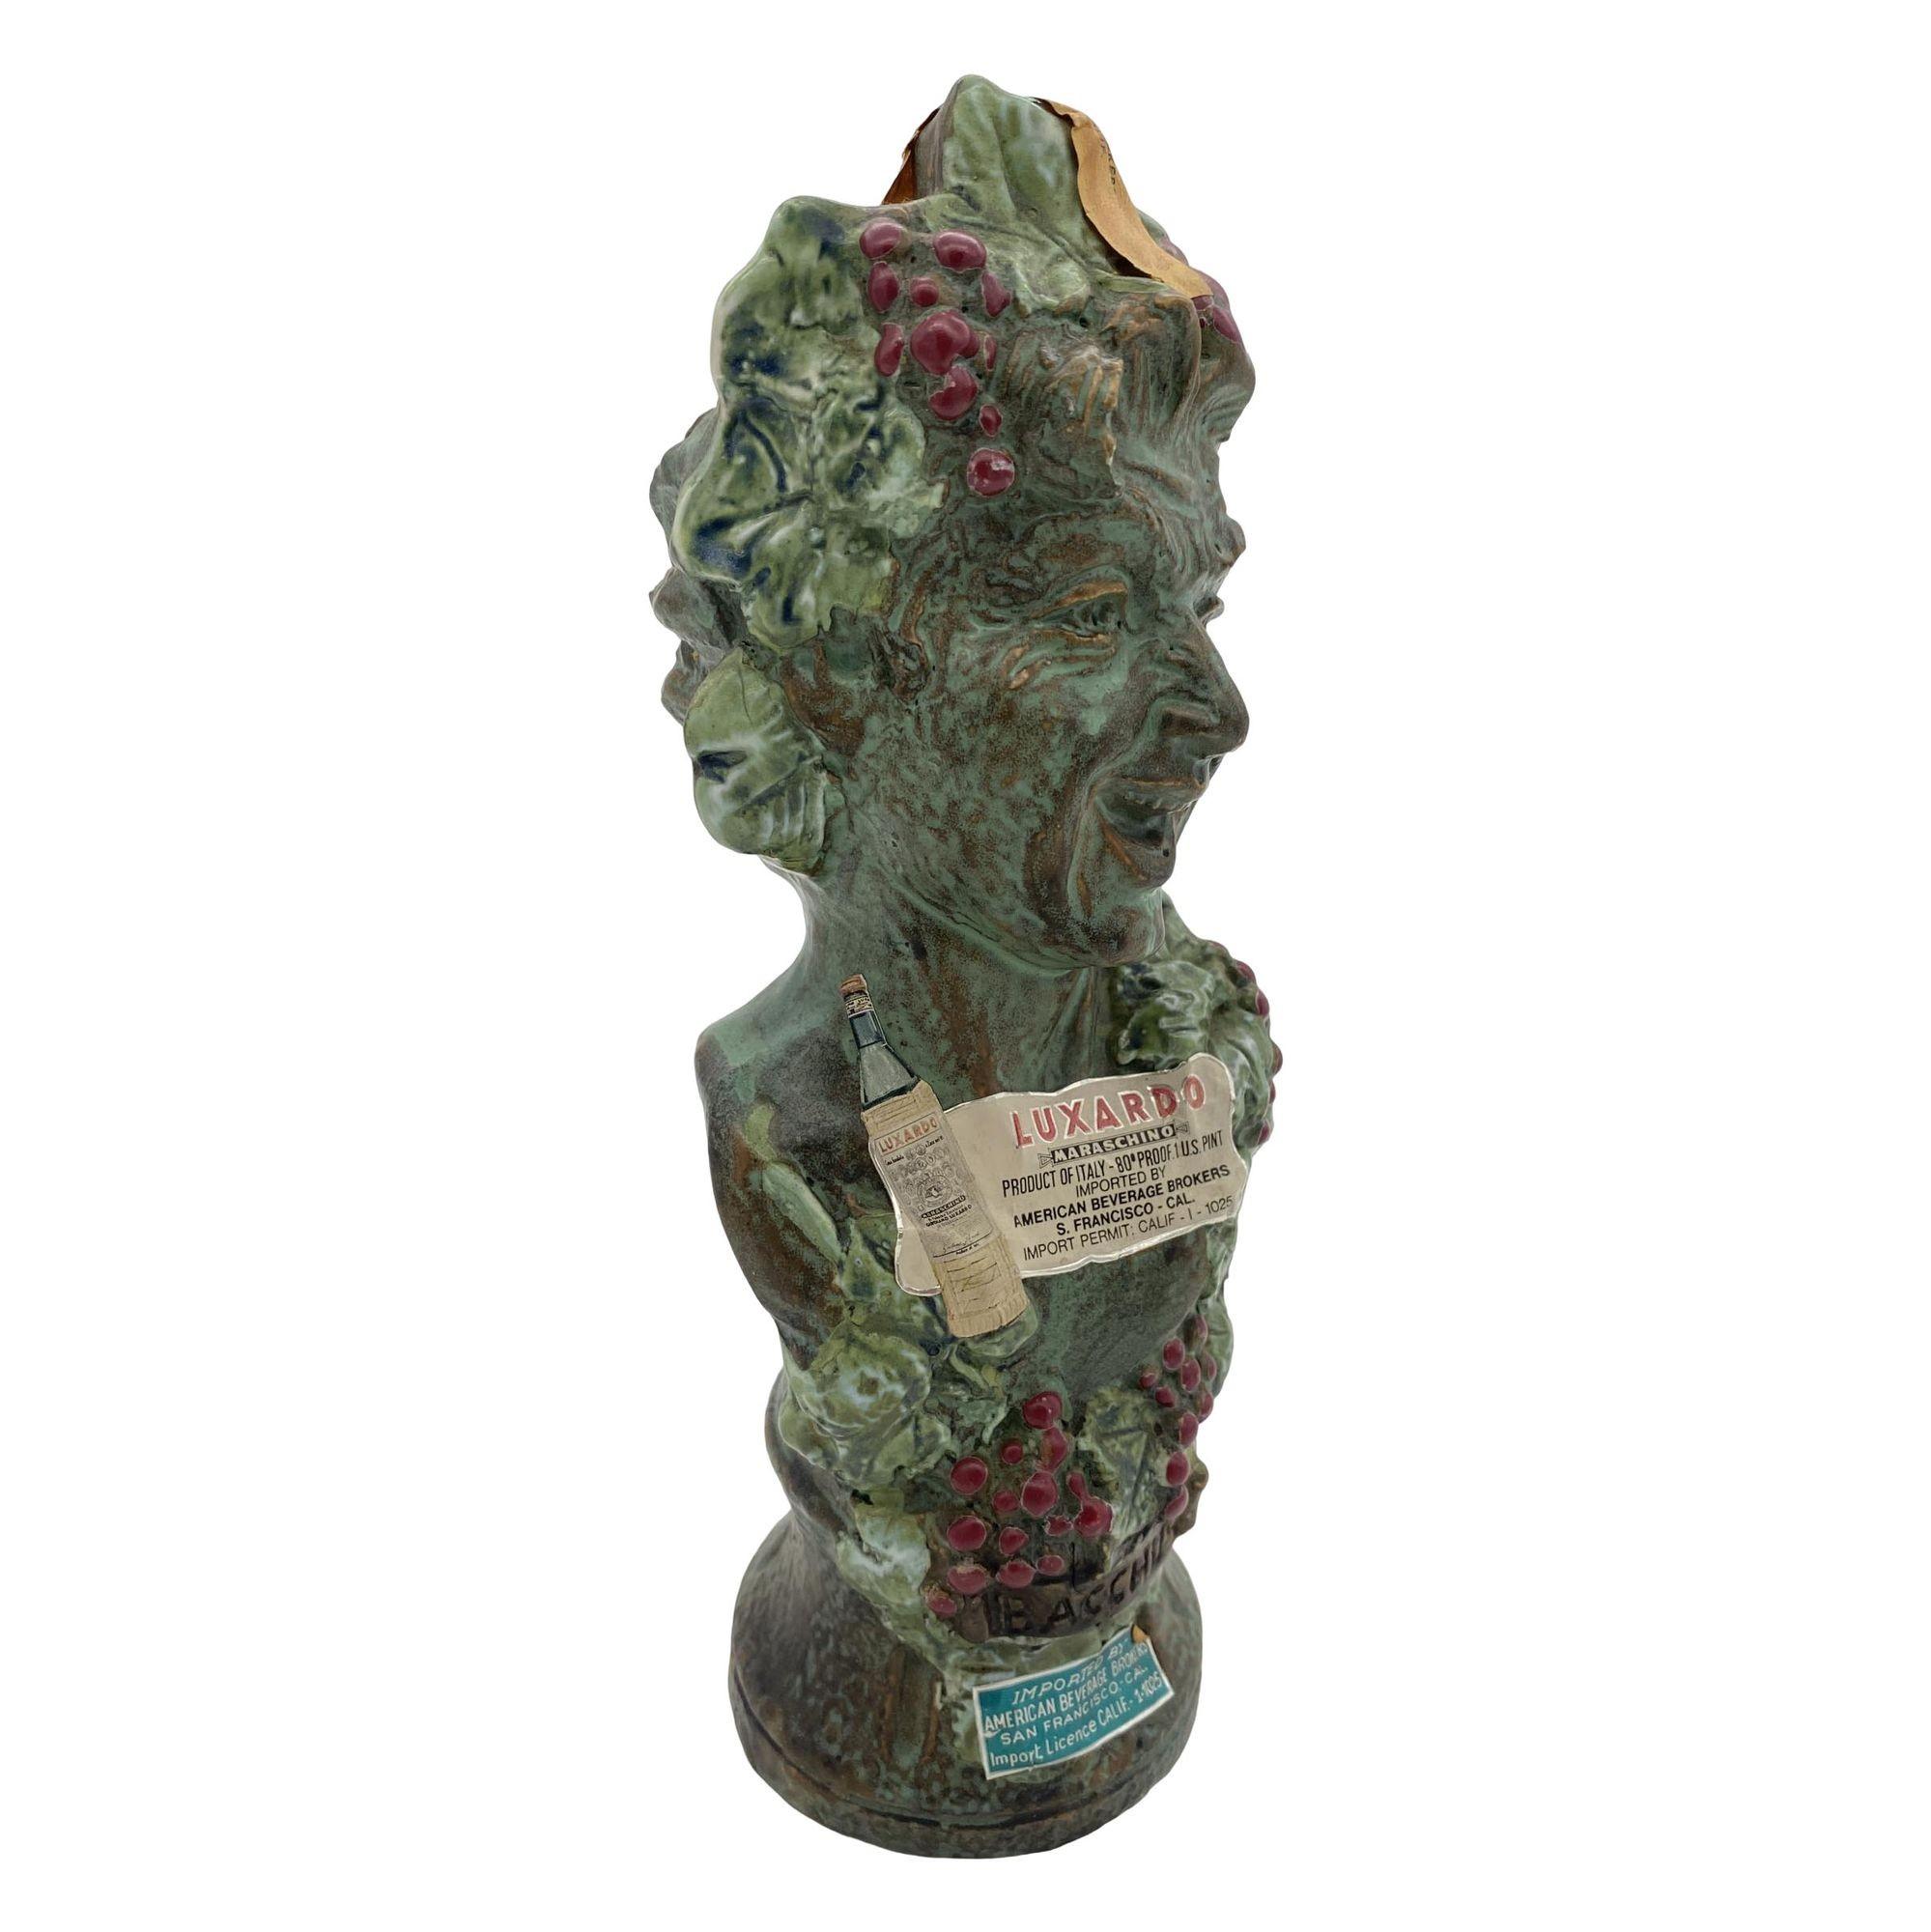 Girolamo Luxardo ardo cherry wine Bacchus bust decanter - Italy - Sealed never opened bottle. The colors are bright and vivid and this piece displays well.